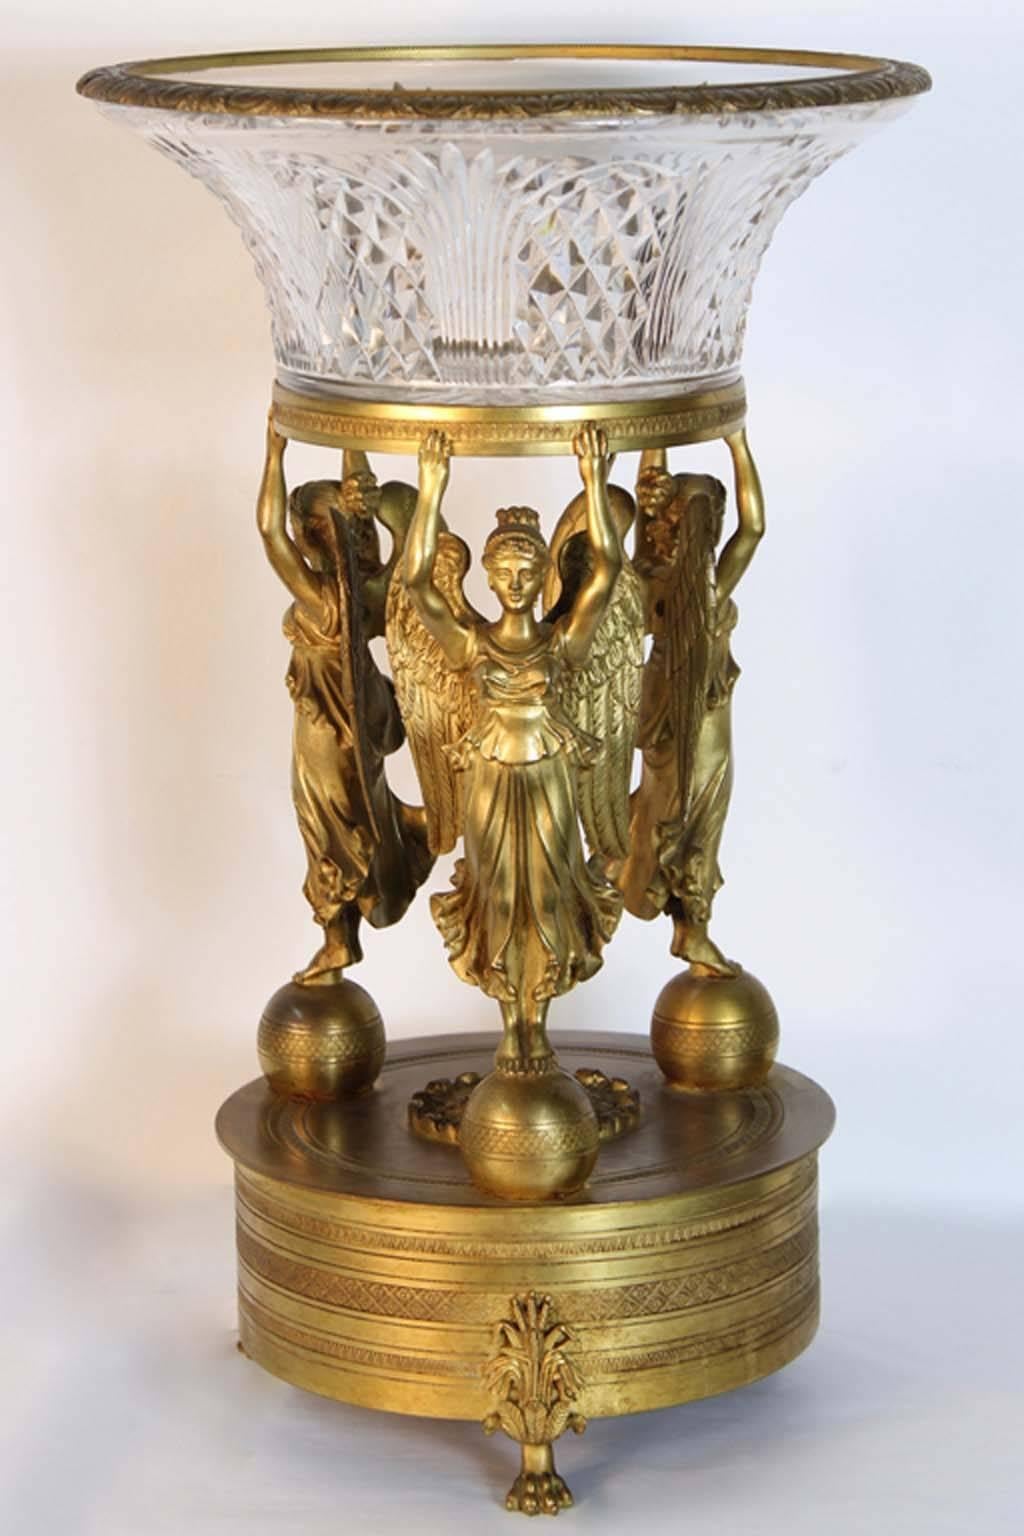 Antique French Empire baccarat and bronze crystal centerpiece attributed to Pierre Philippe Thomire. A palace size French Empire antique gilt bronze figural centerpiece with its original diamond cut Baccarat crystal bowl. Having mercury gilded